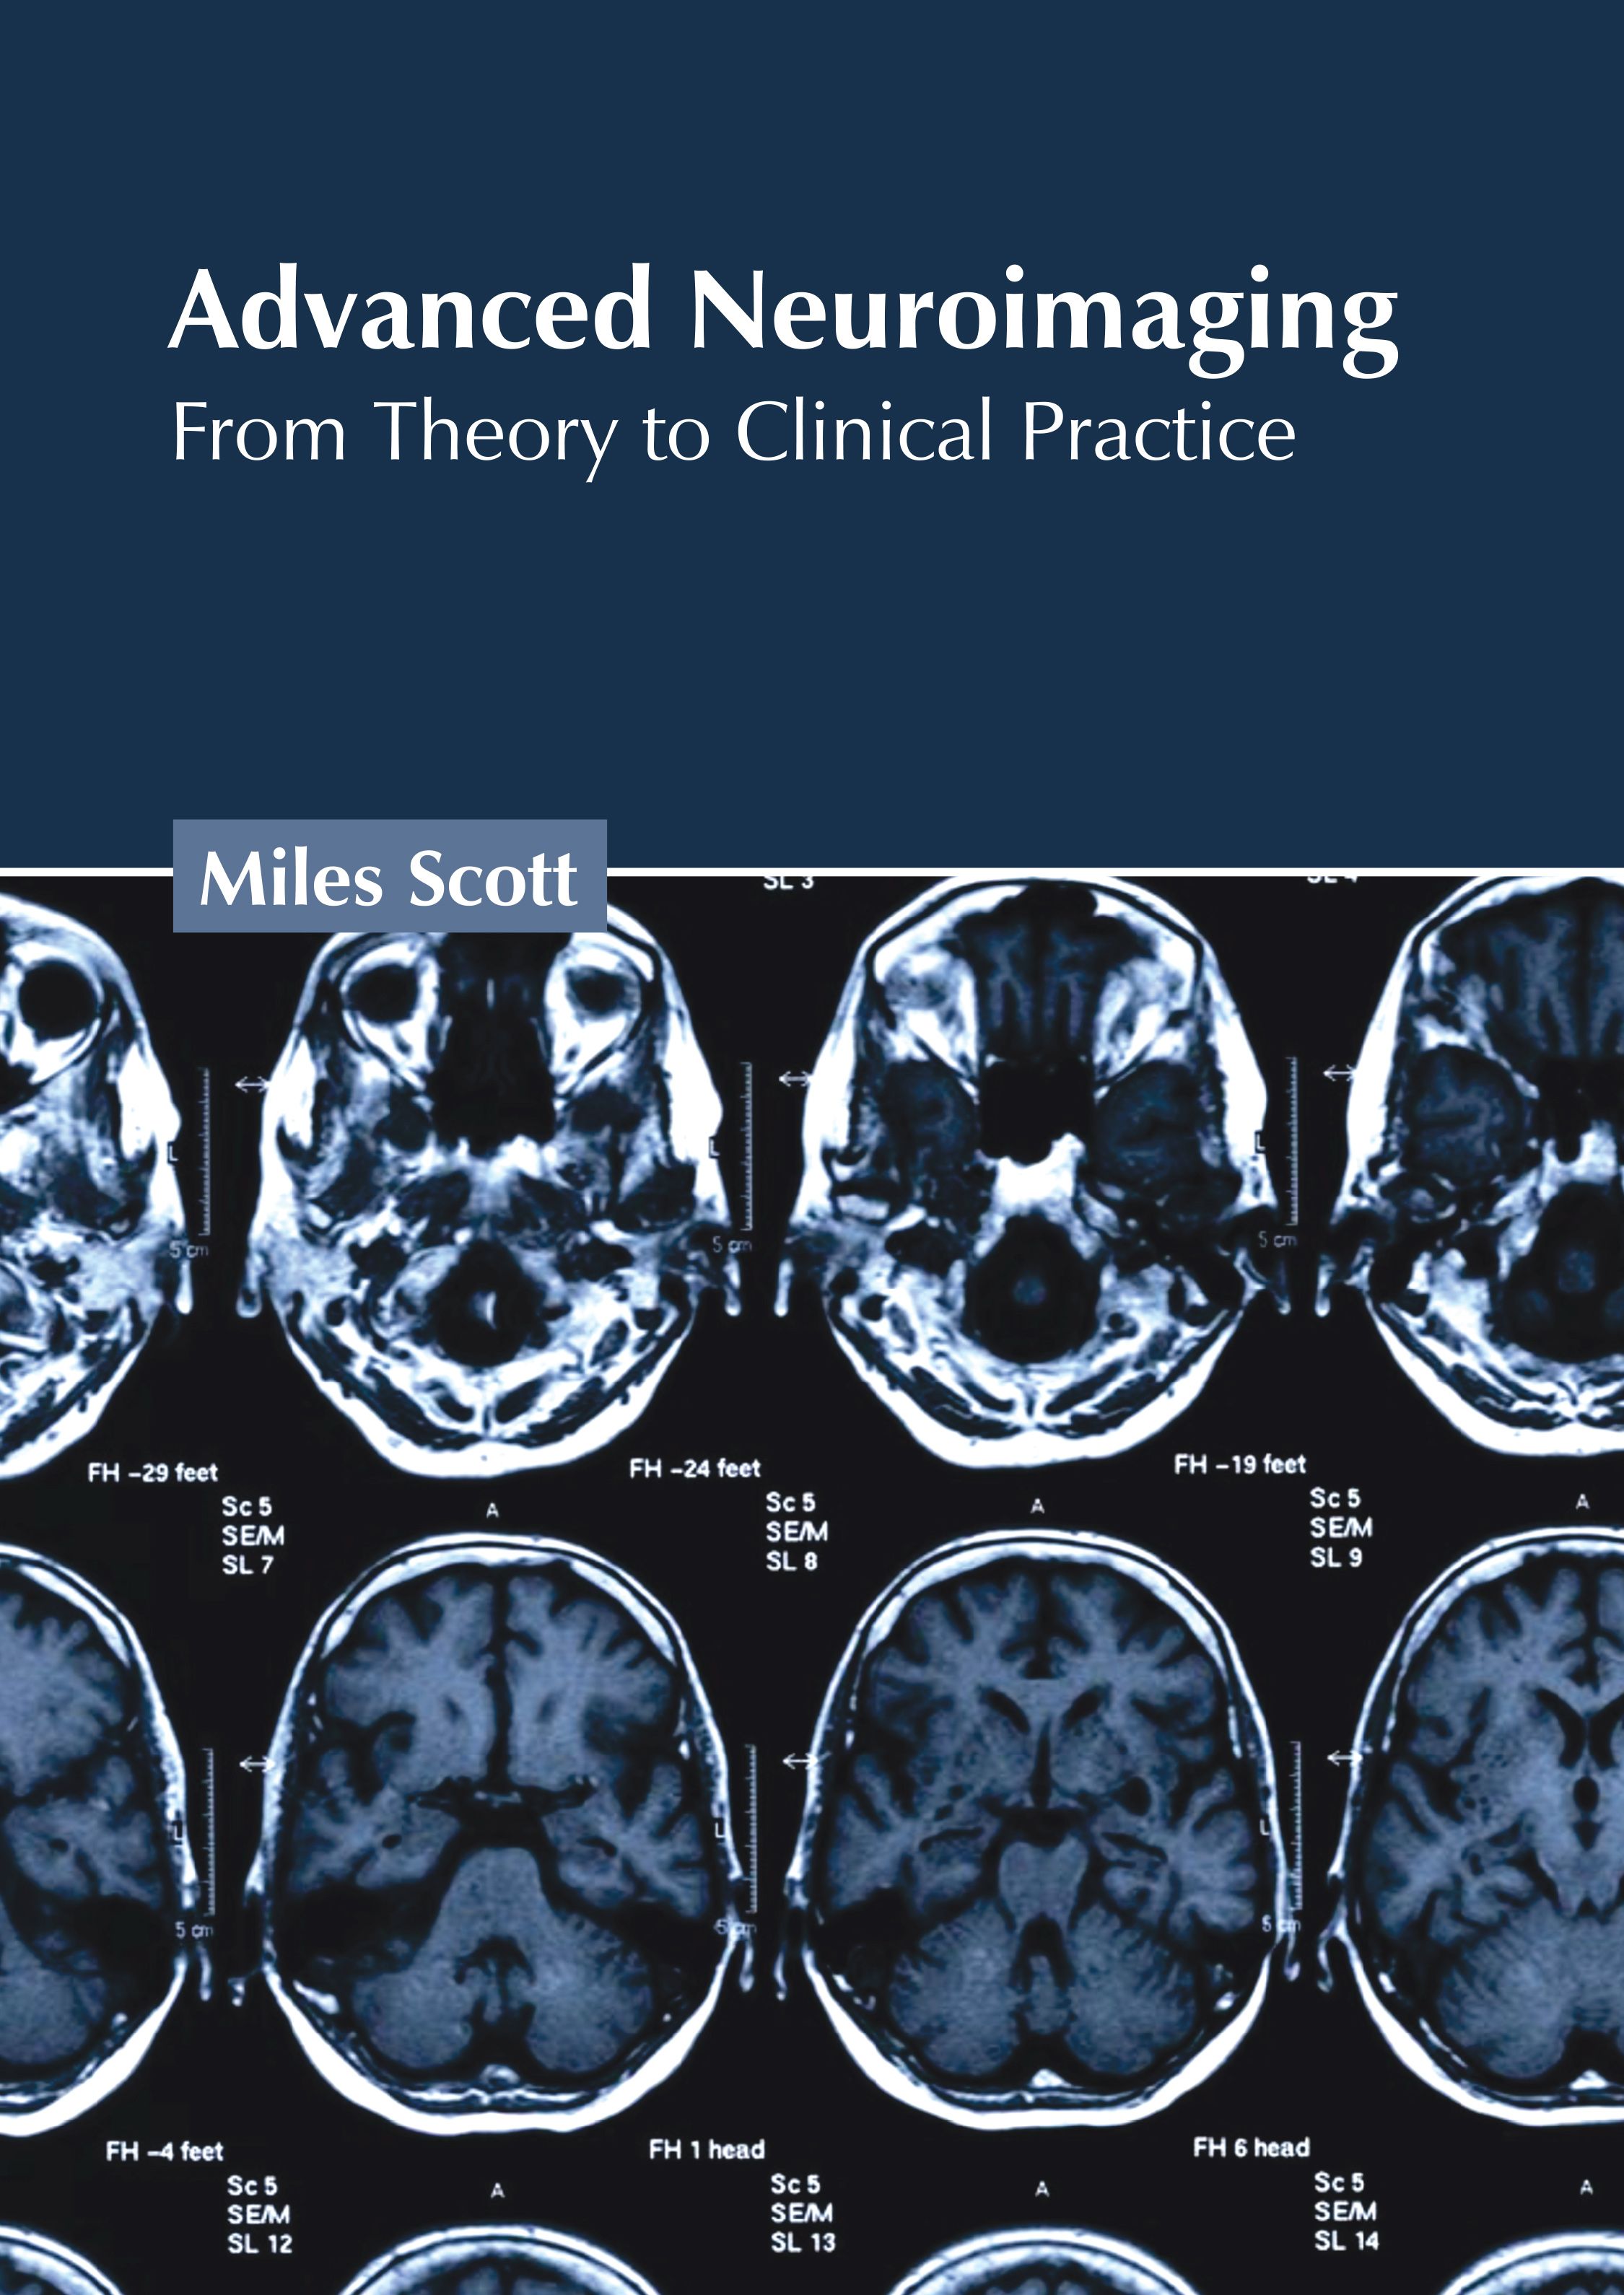 

exclusive-publishers/american-medical-publishers/advanced-neuroimaging-from-theory-to-clinical-practice-9781639278558